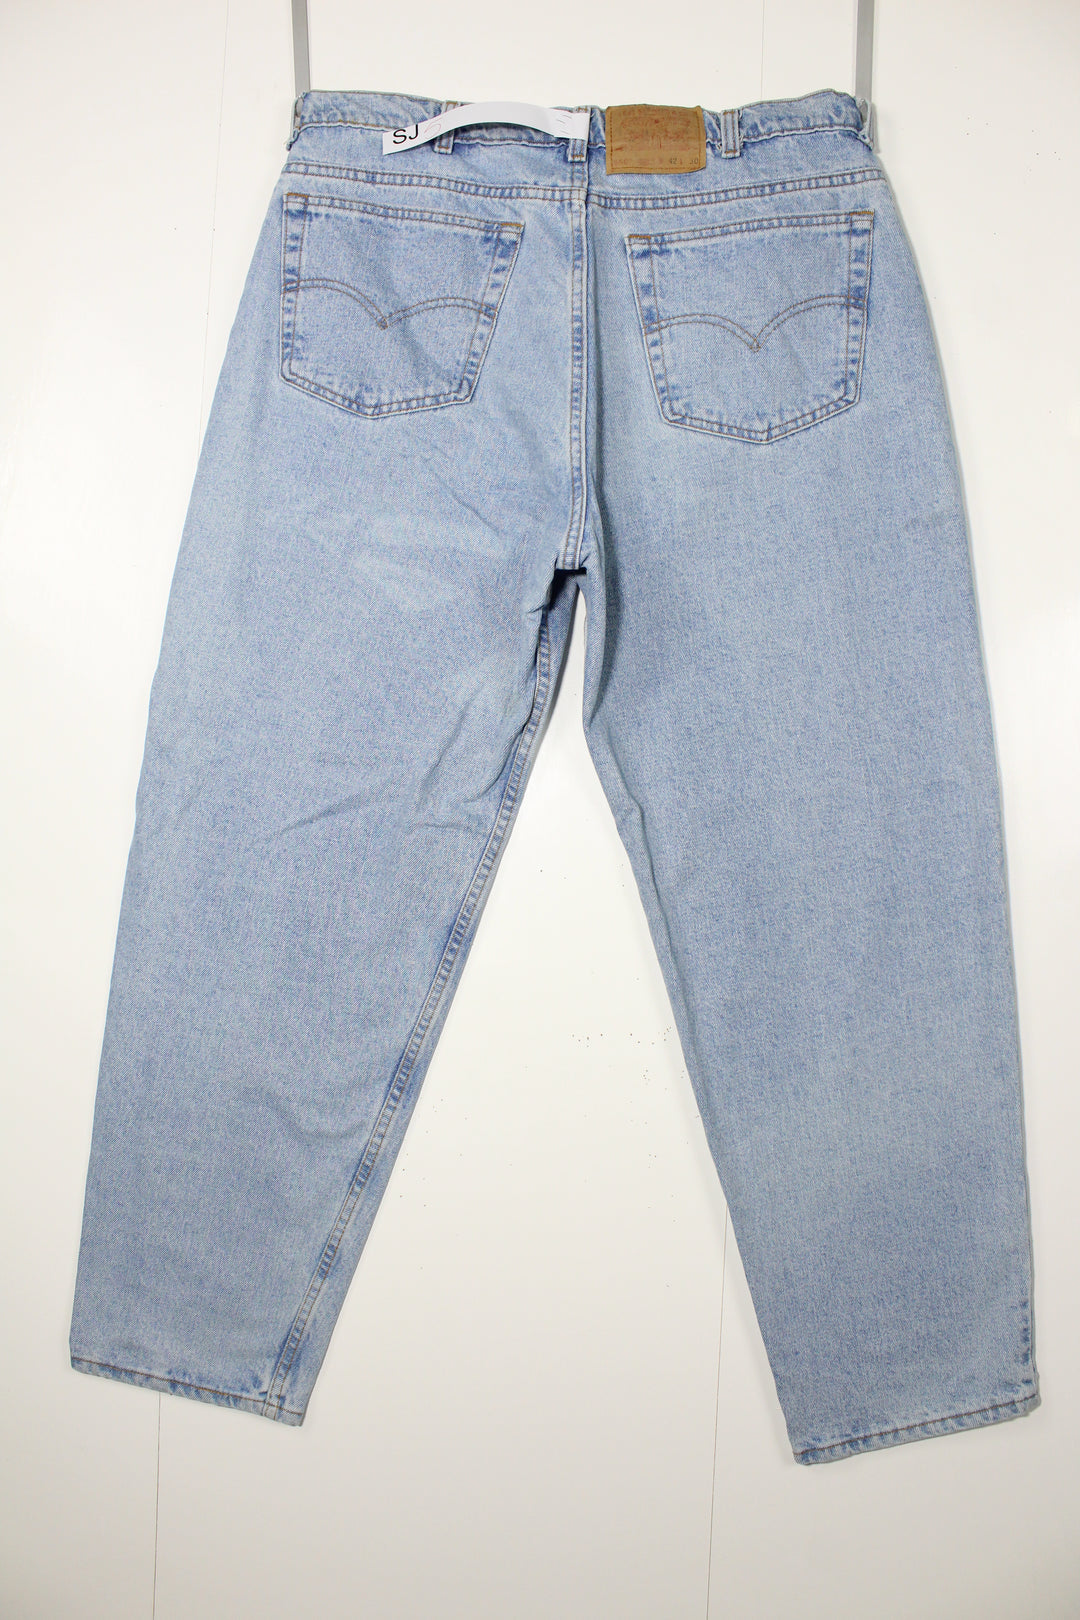 Levi's 550 Relaxed Fit Denim Made In USA W42 L30 Vintage